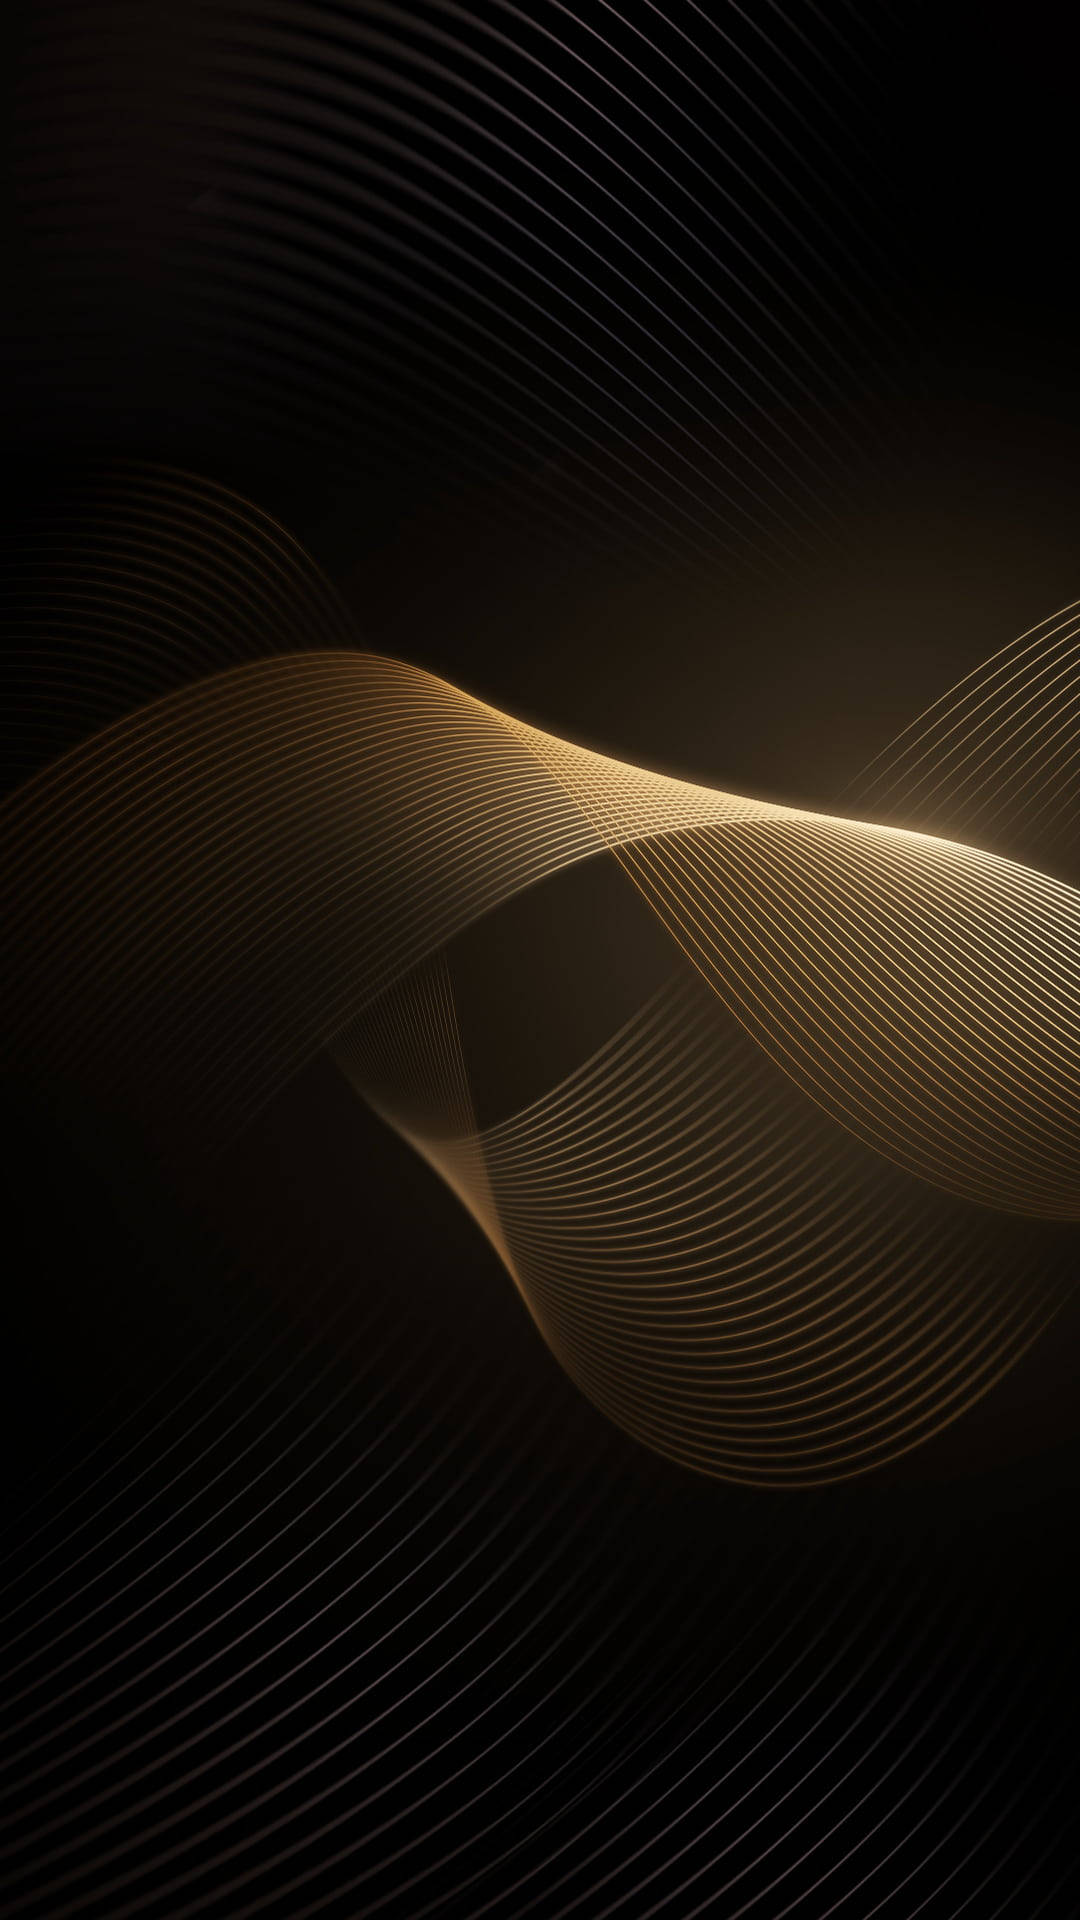 Wavy Lines Black And Gold Iphone Wallpaper